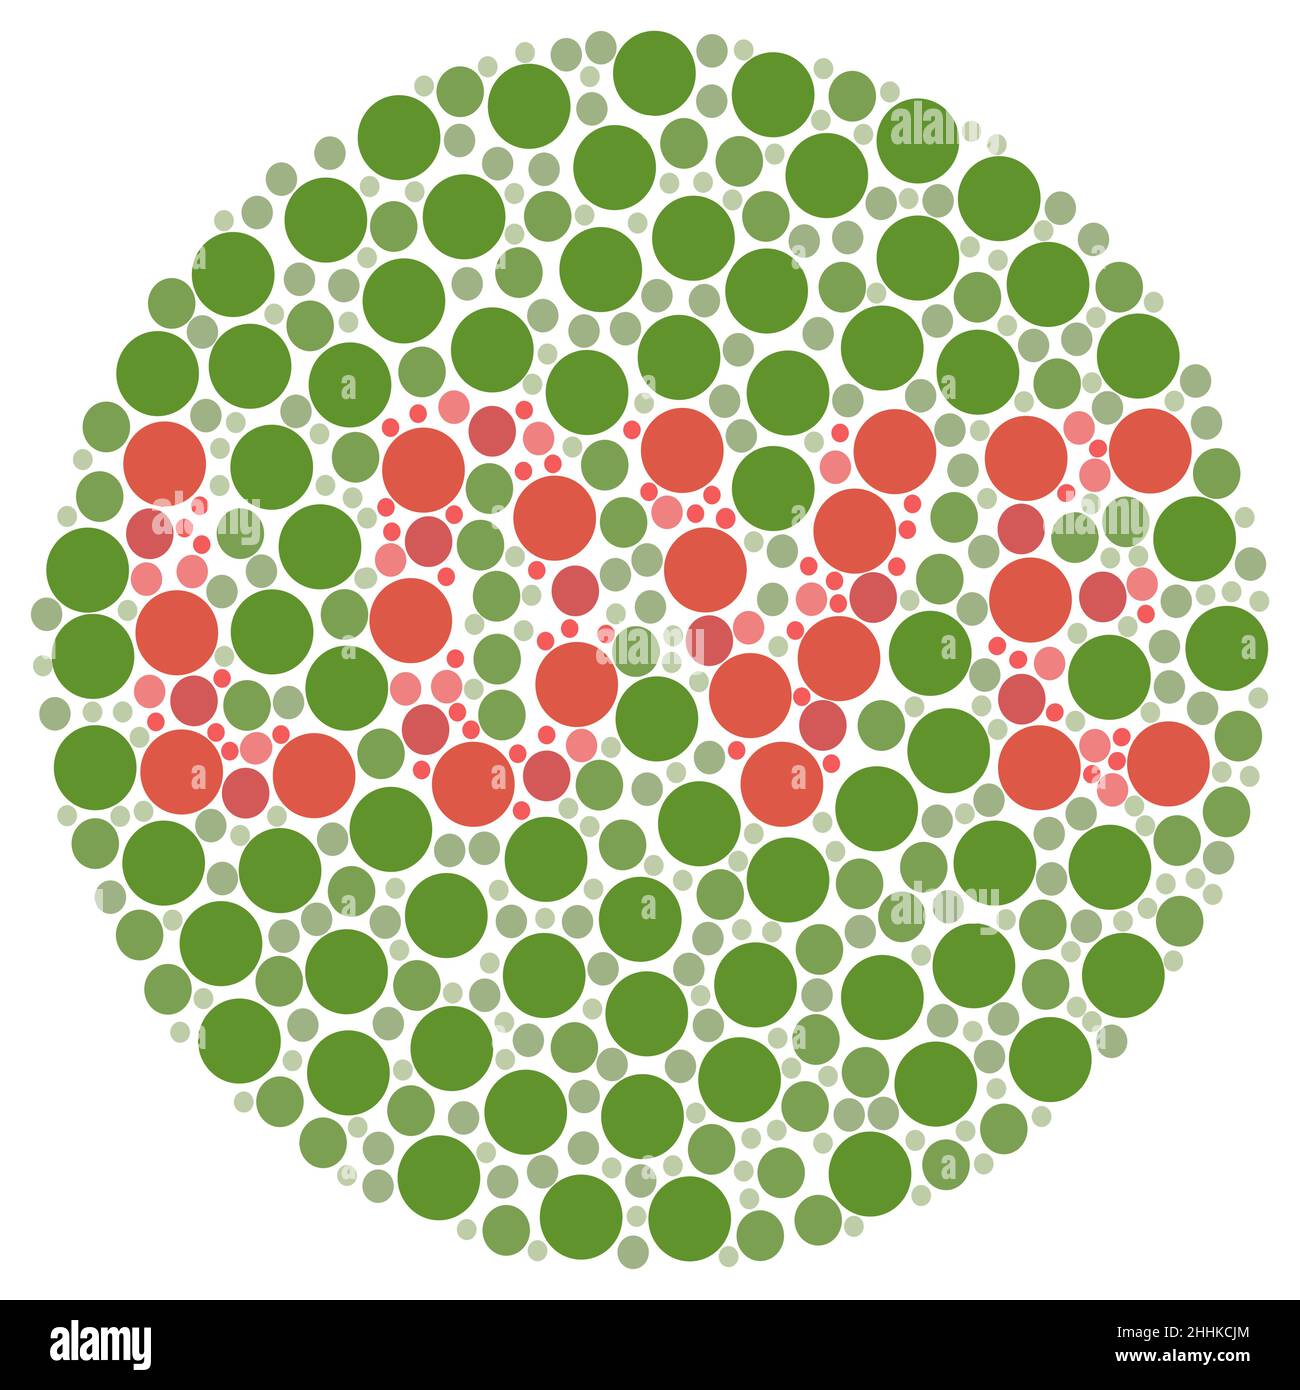 Colour blind test with word LOVE. Love is blind concept Stock Vector